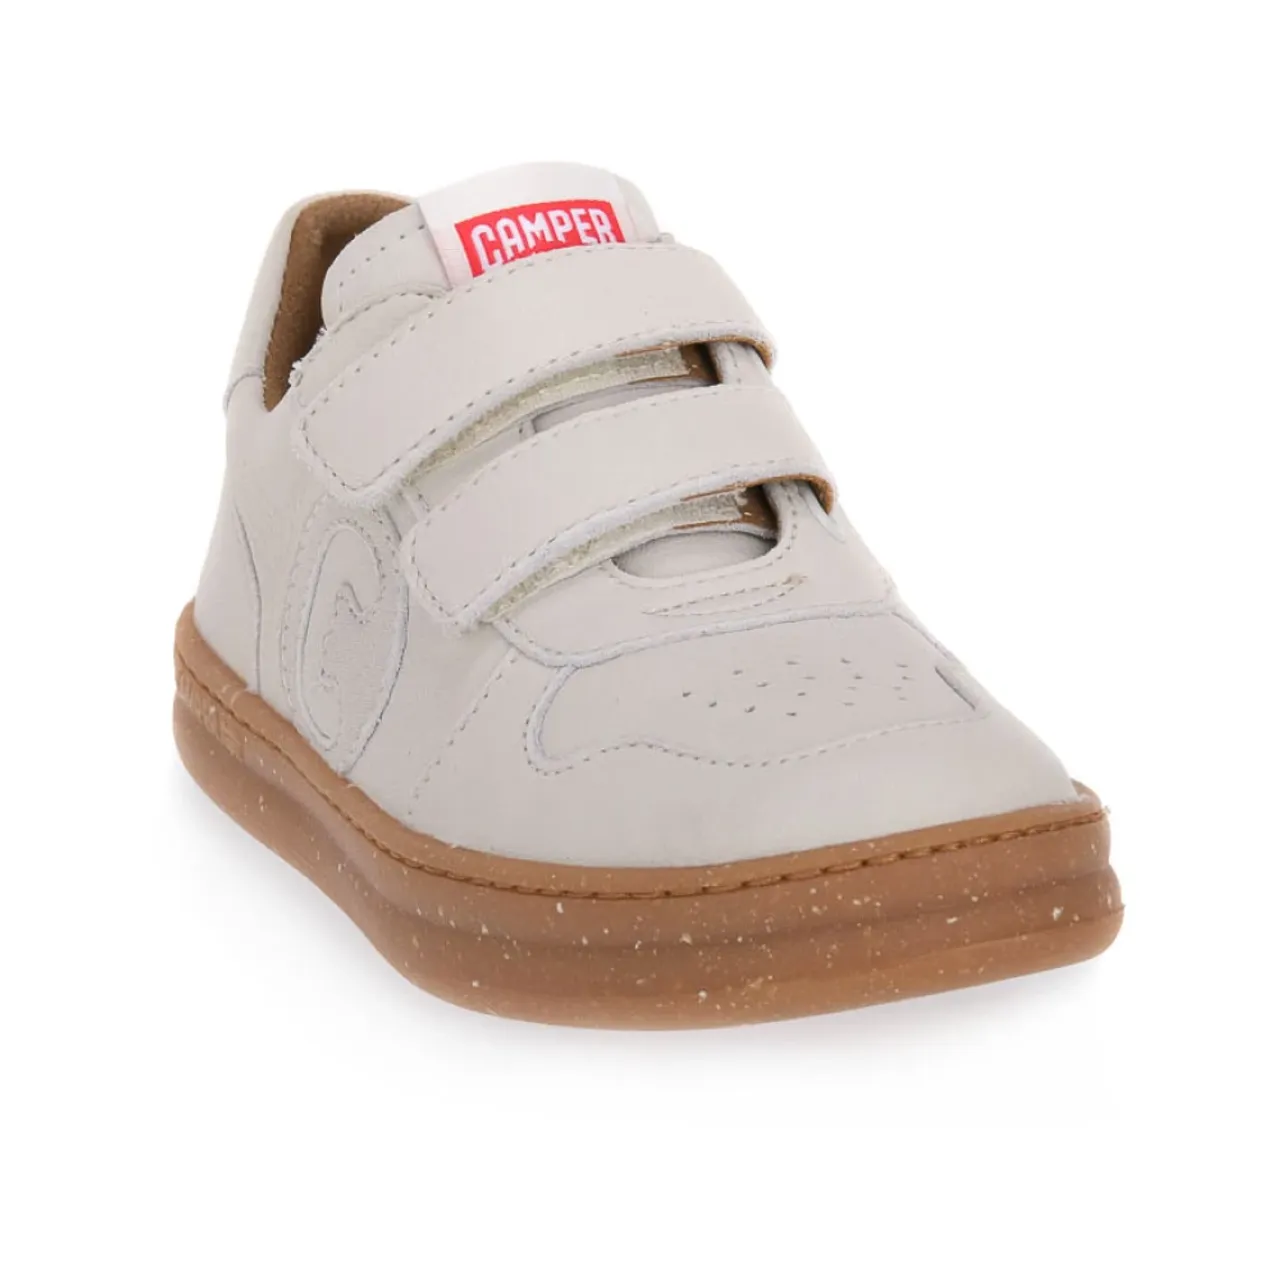 Camper , Elegant Leather Sneakers for Kids ,Brown unisex, Sizes: